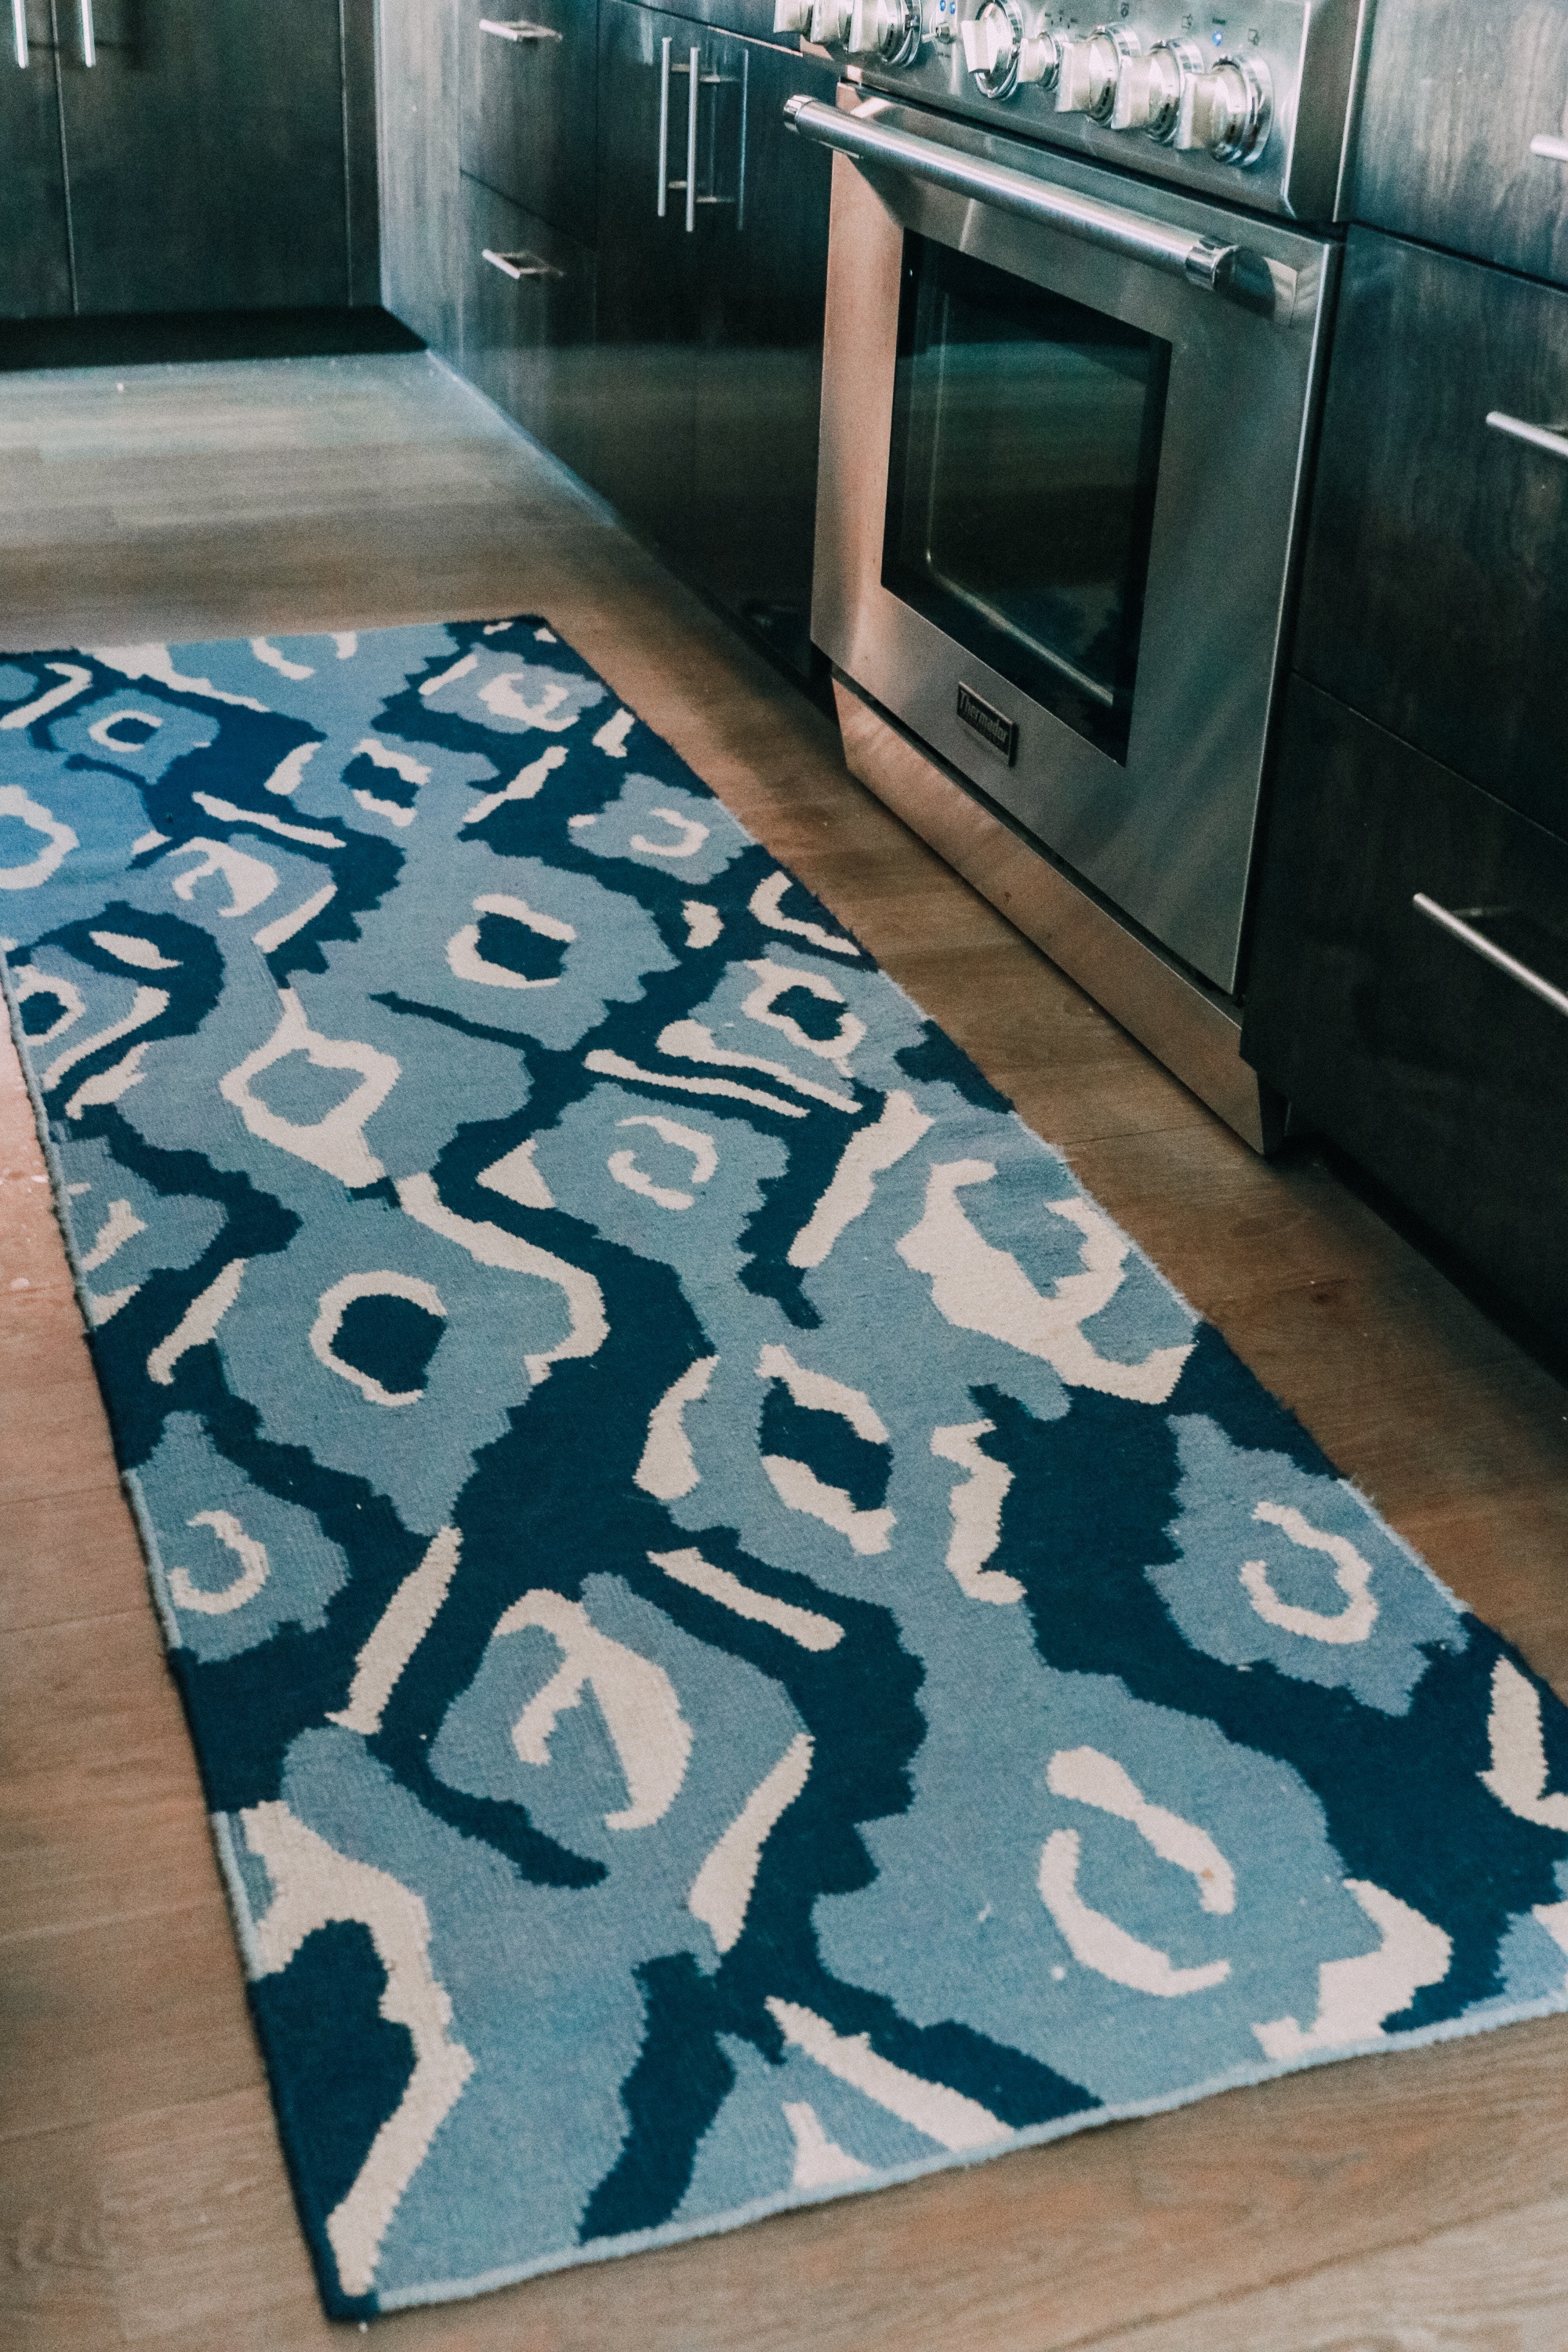 blue and white ikat kitchen rug runner by stove House Tour modern mountain townhome Telluride Colorado